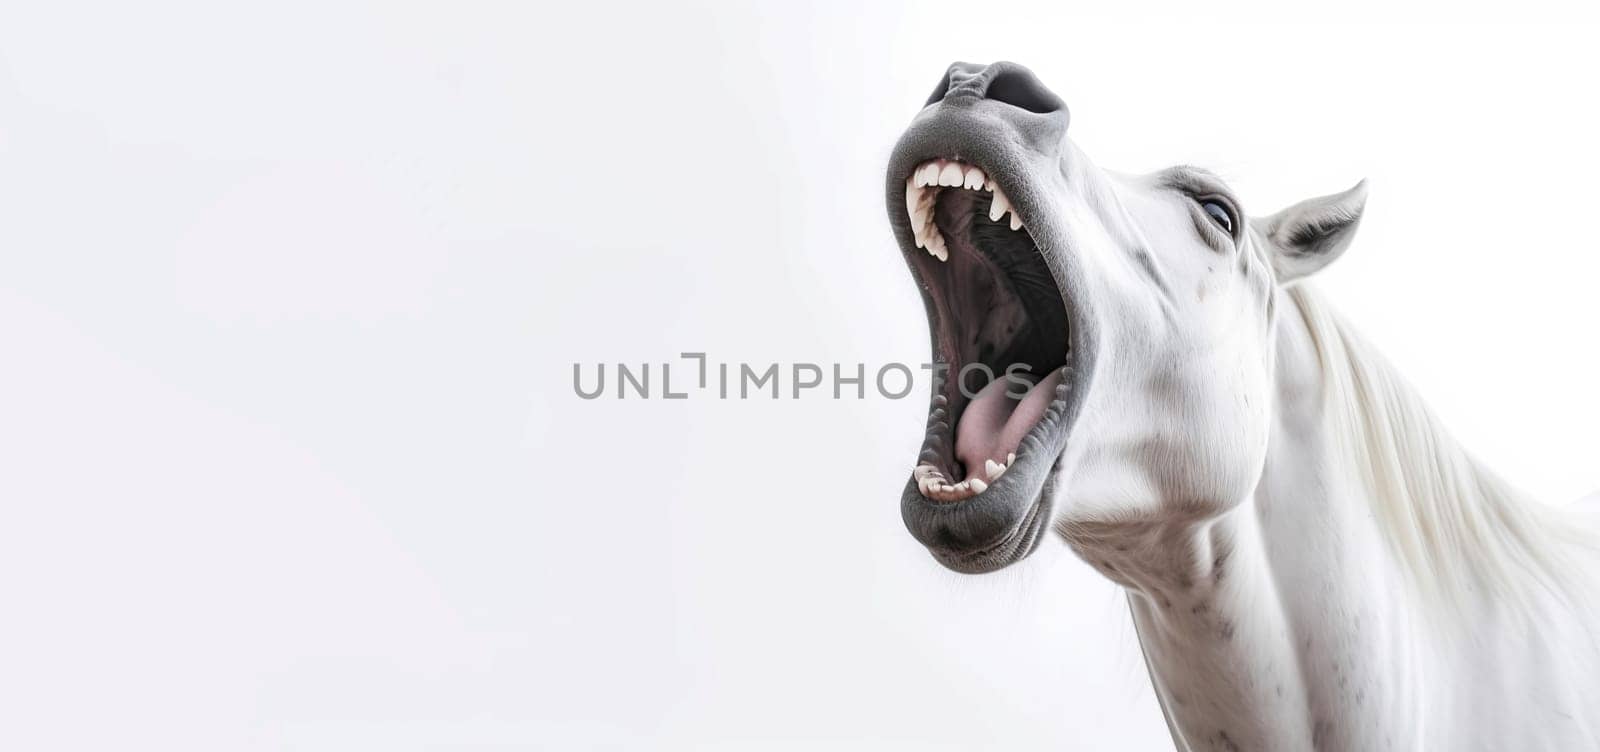 Horse screaming face banner. Smile teeth. Generate Ai